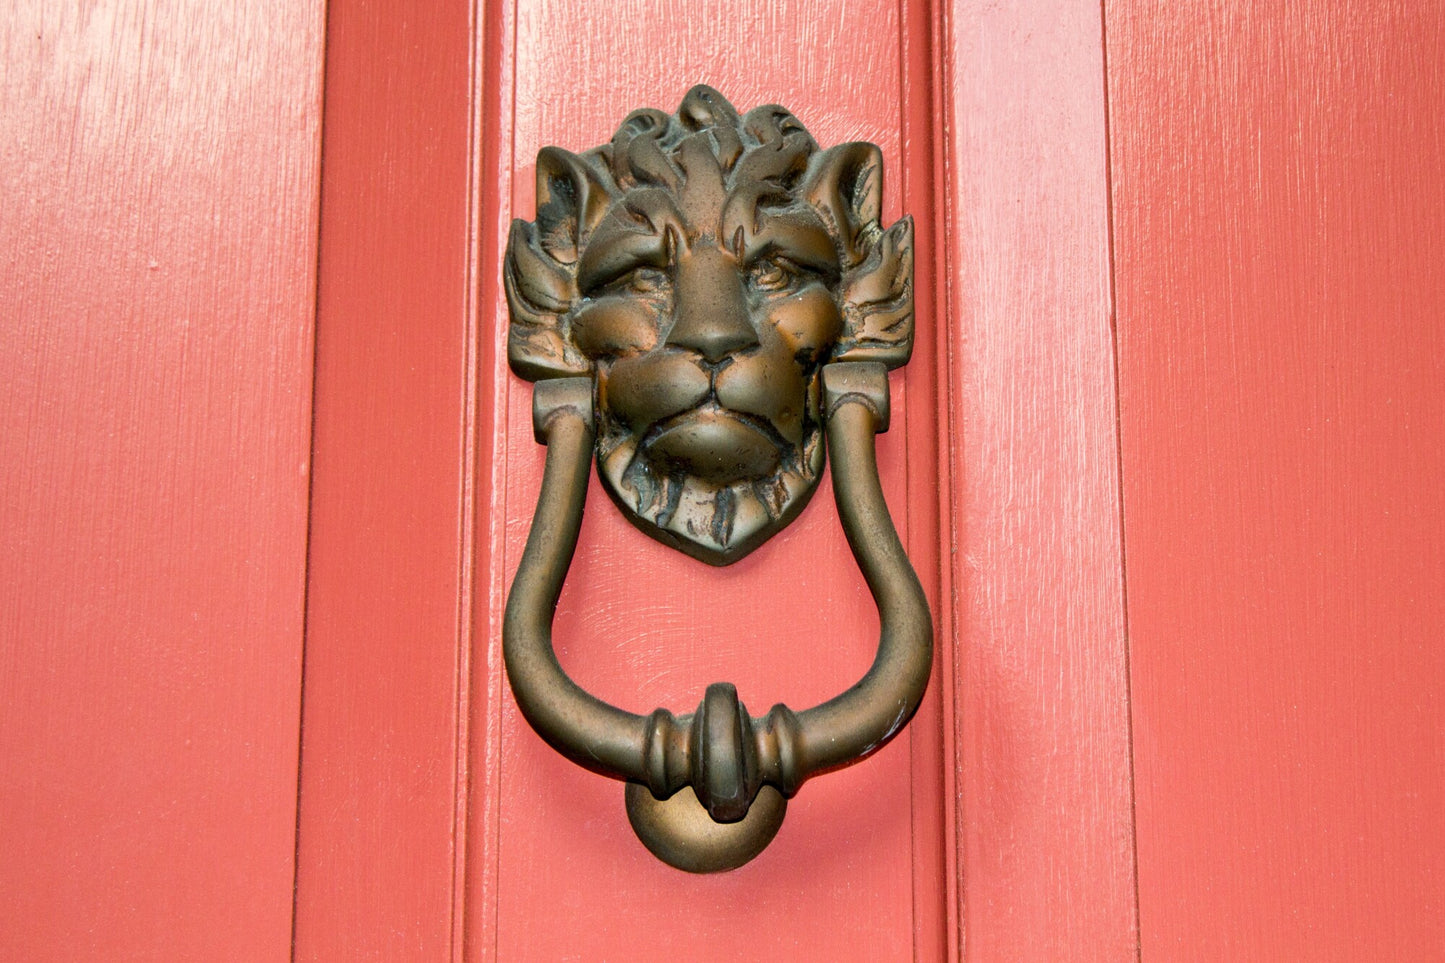 A Home Owner's Guide to the Different Types of Door Knockers – Old West Iron